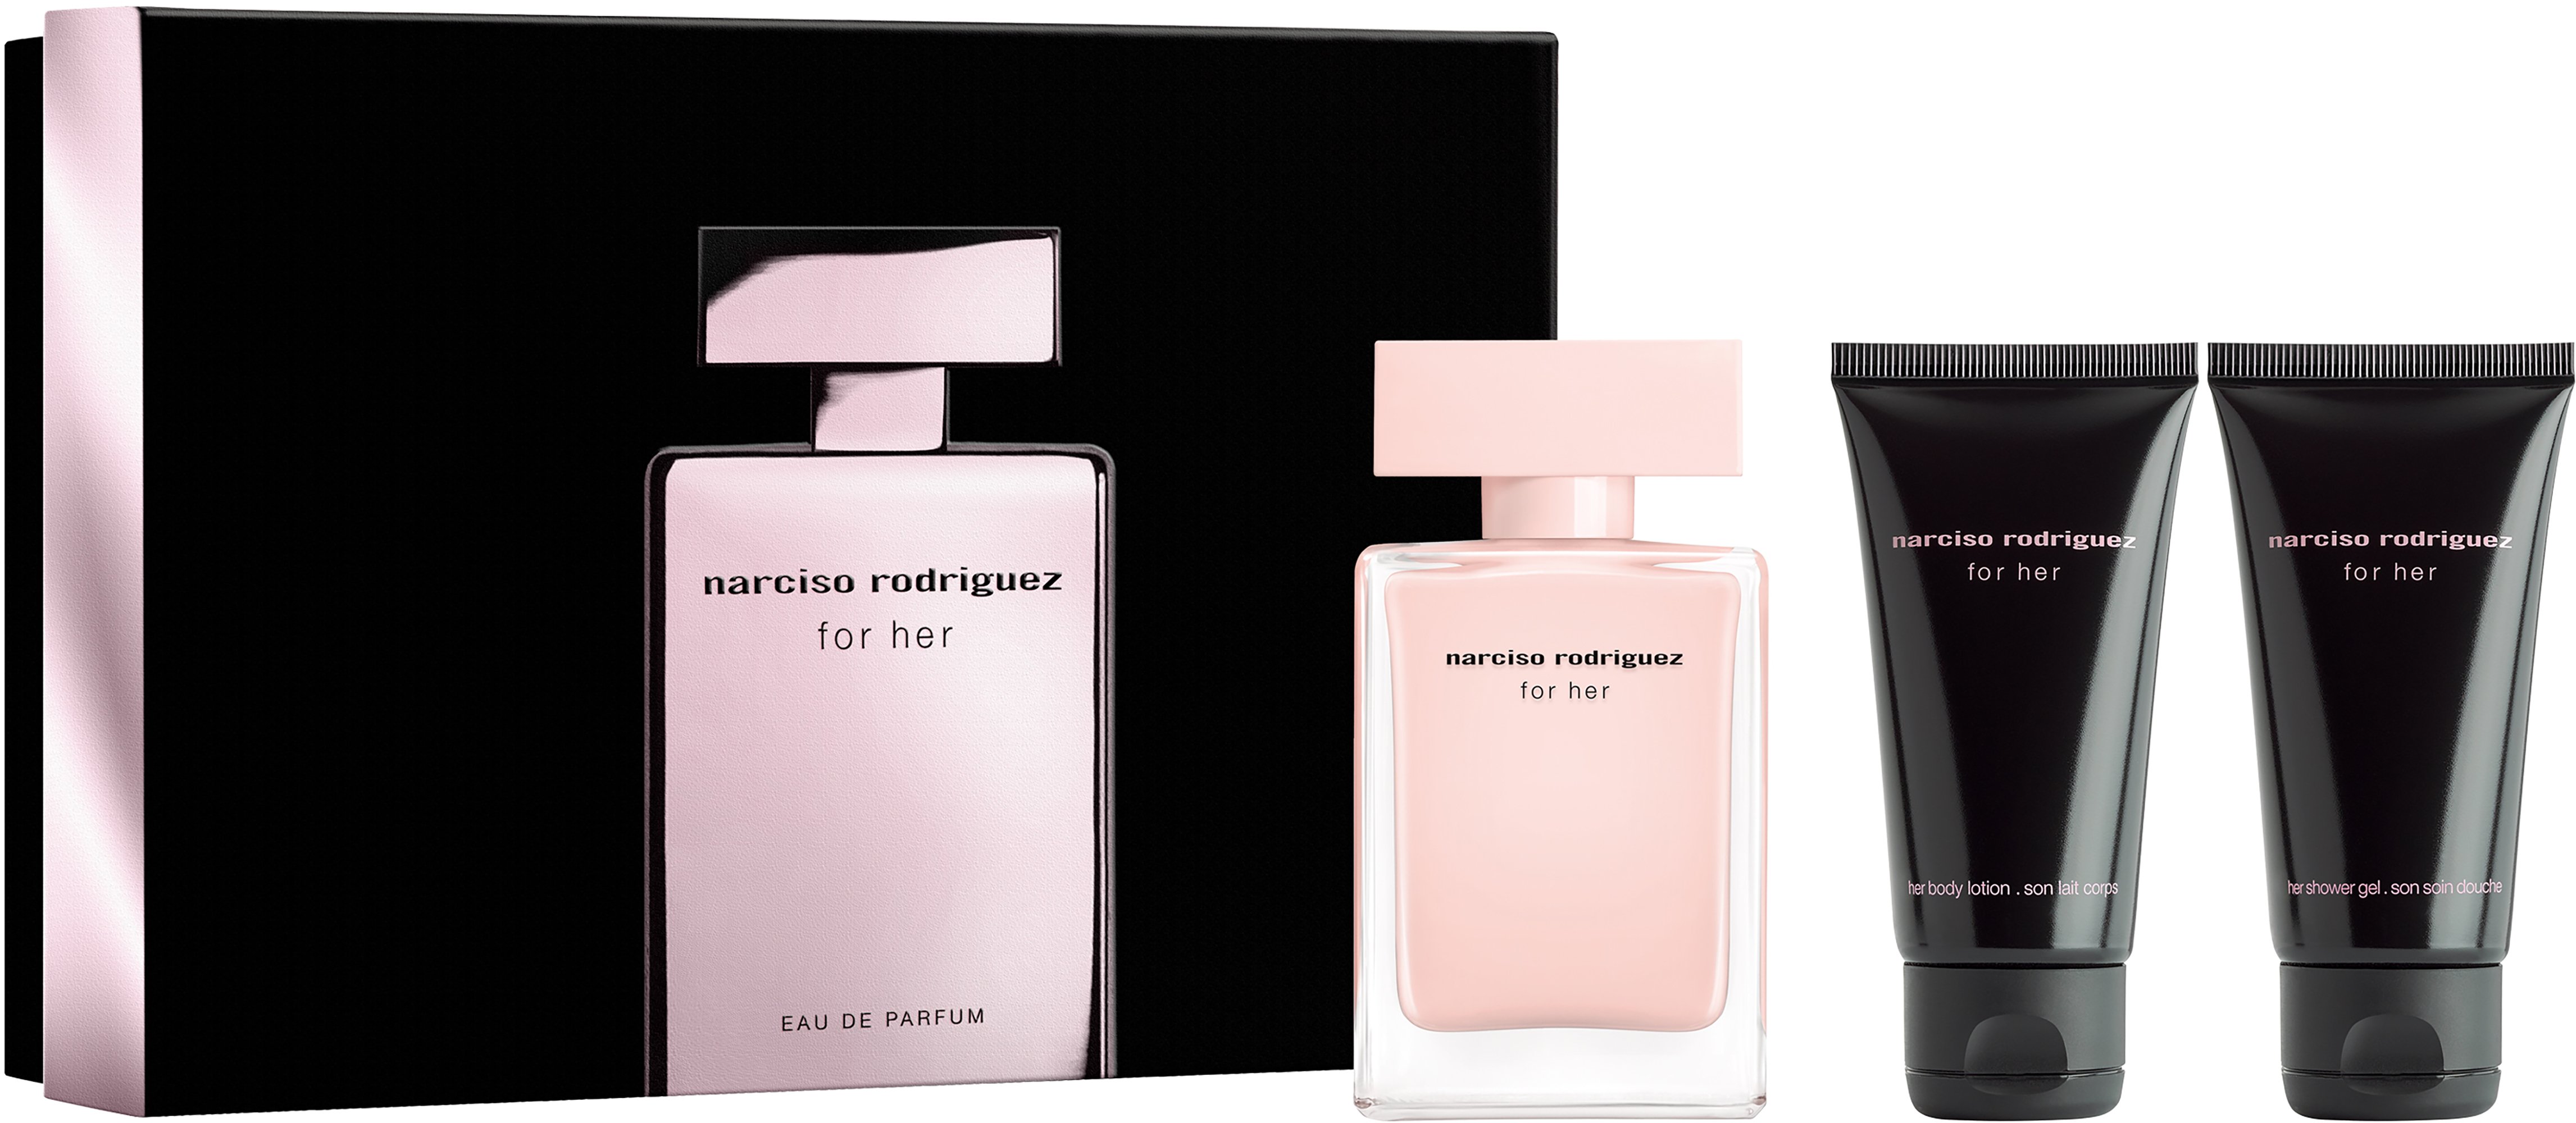 Buy Narciso Rodriguez - + shipping Her 50 ml Lotion For Body EDP ml+ Free Giftset Shower Gel 50 - - 50